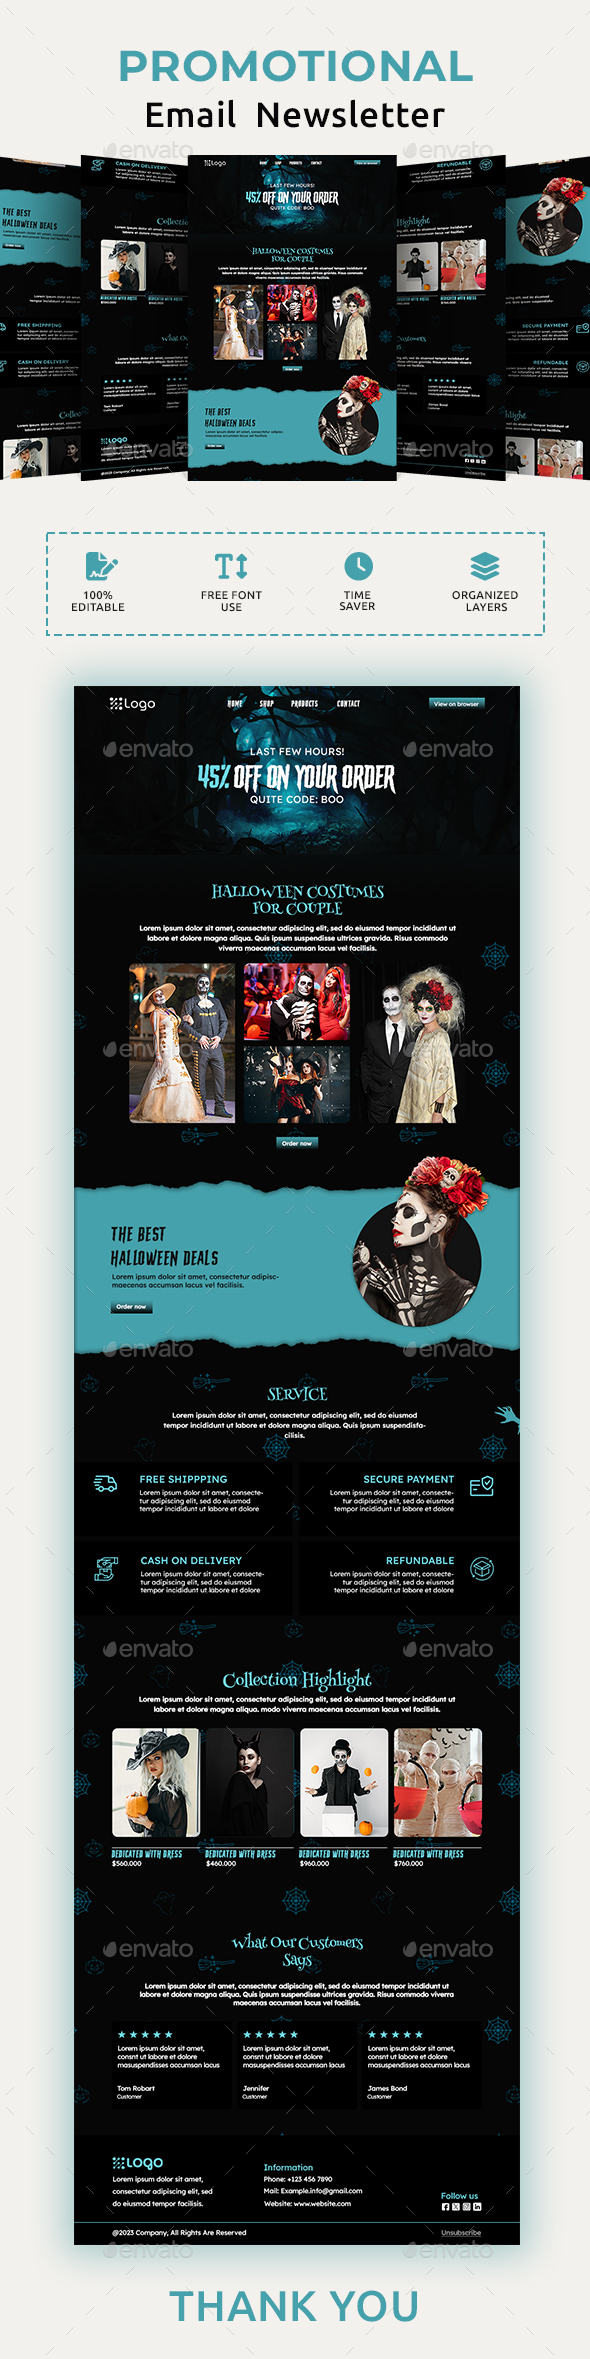 [DOWNLOAD]Halloween Email Newsletter PSD Template